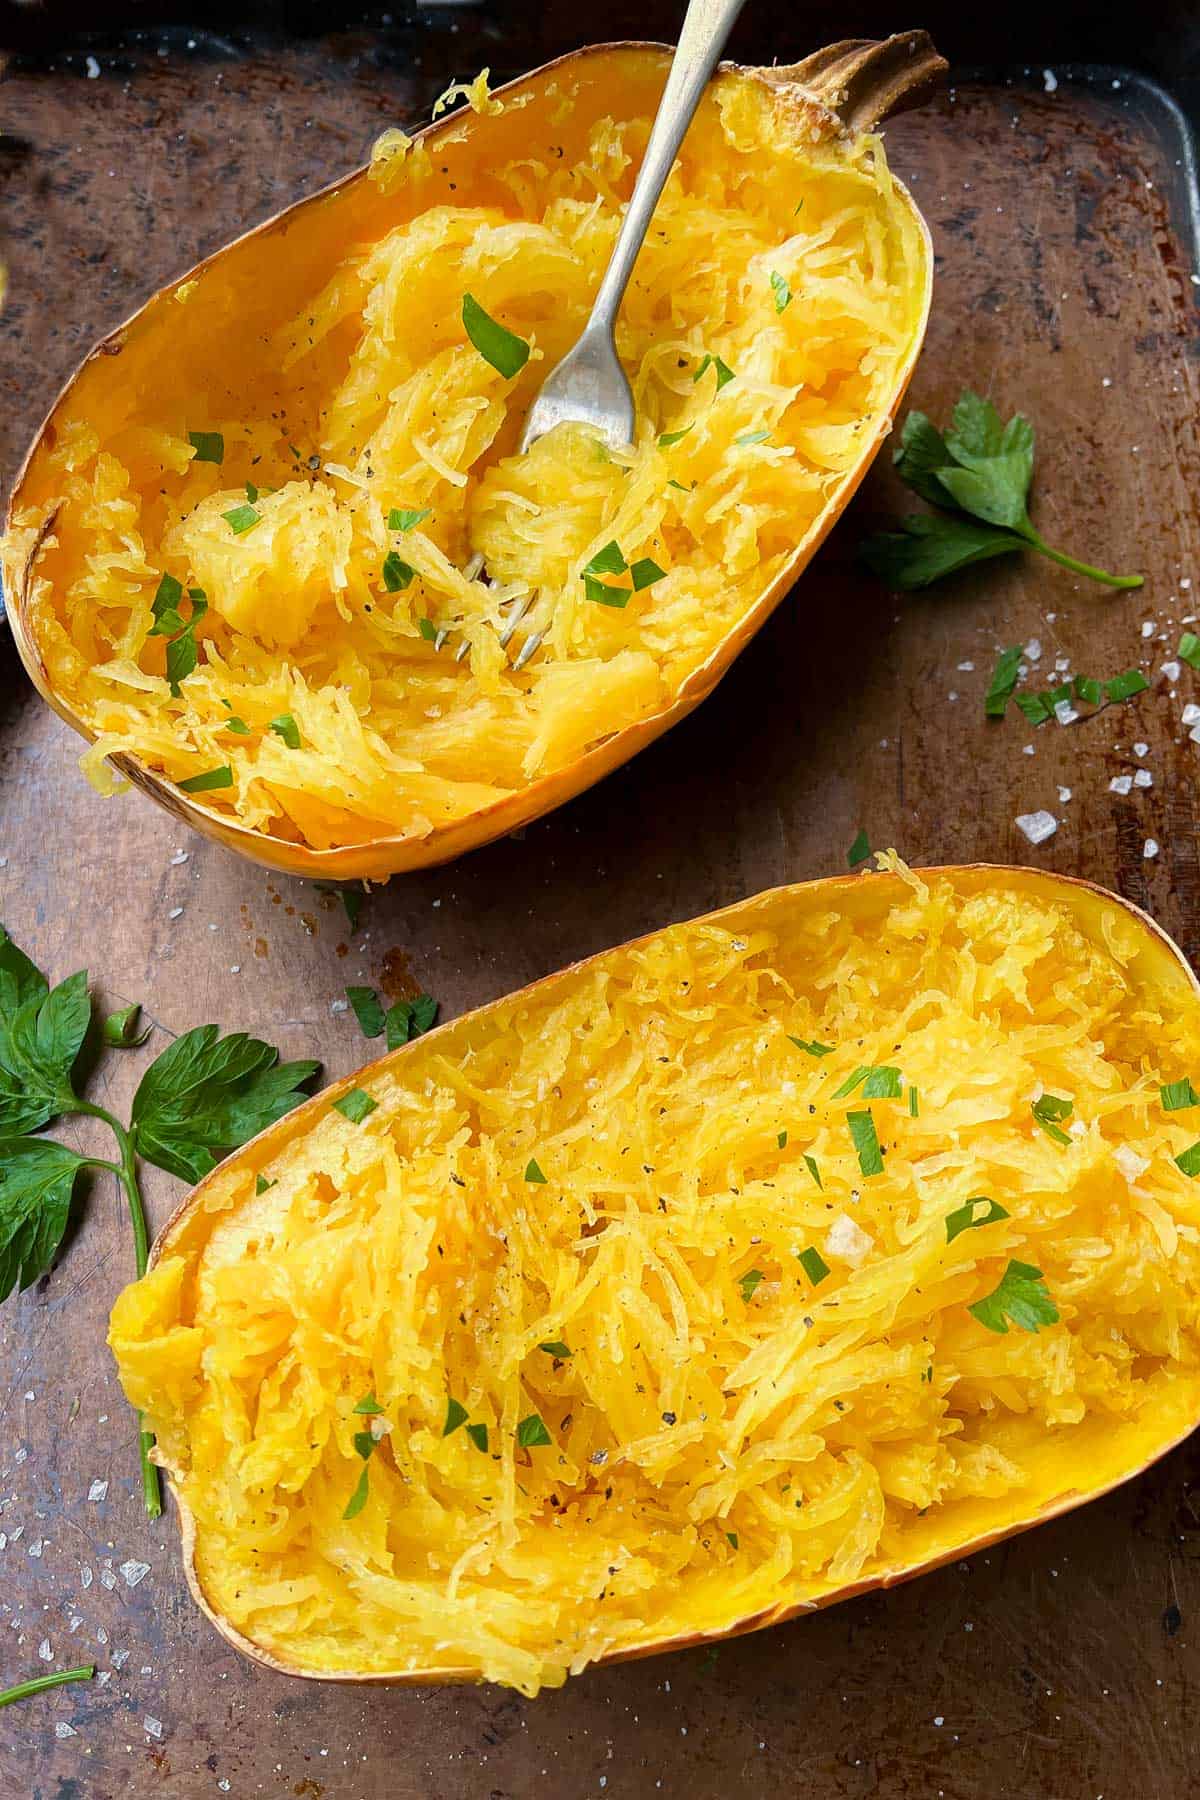 two roasted spaghetti squash halves with their strands pulled, fluffed and sprinkled with salt, pepper and parsley - a fork twirled into the strands of one squash half.